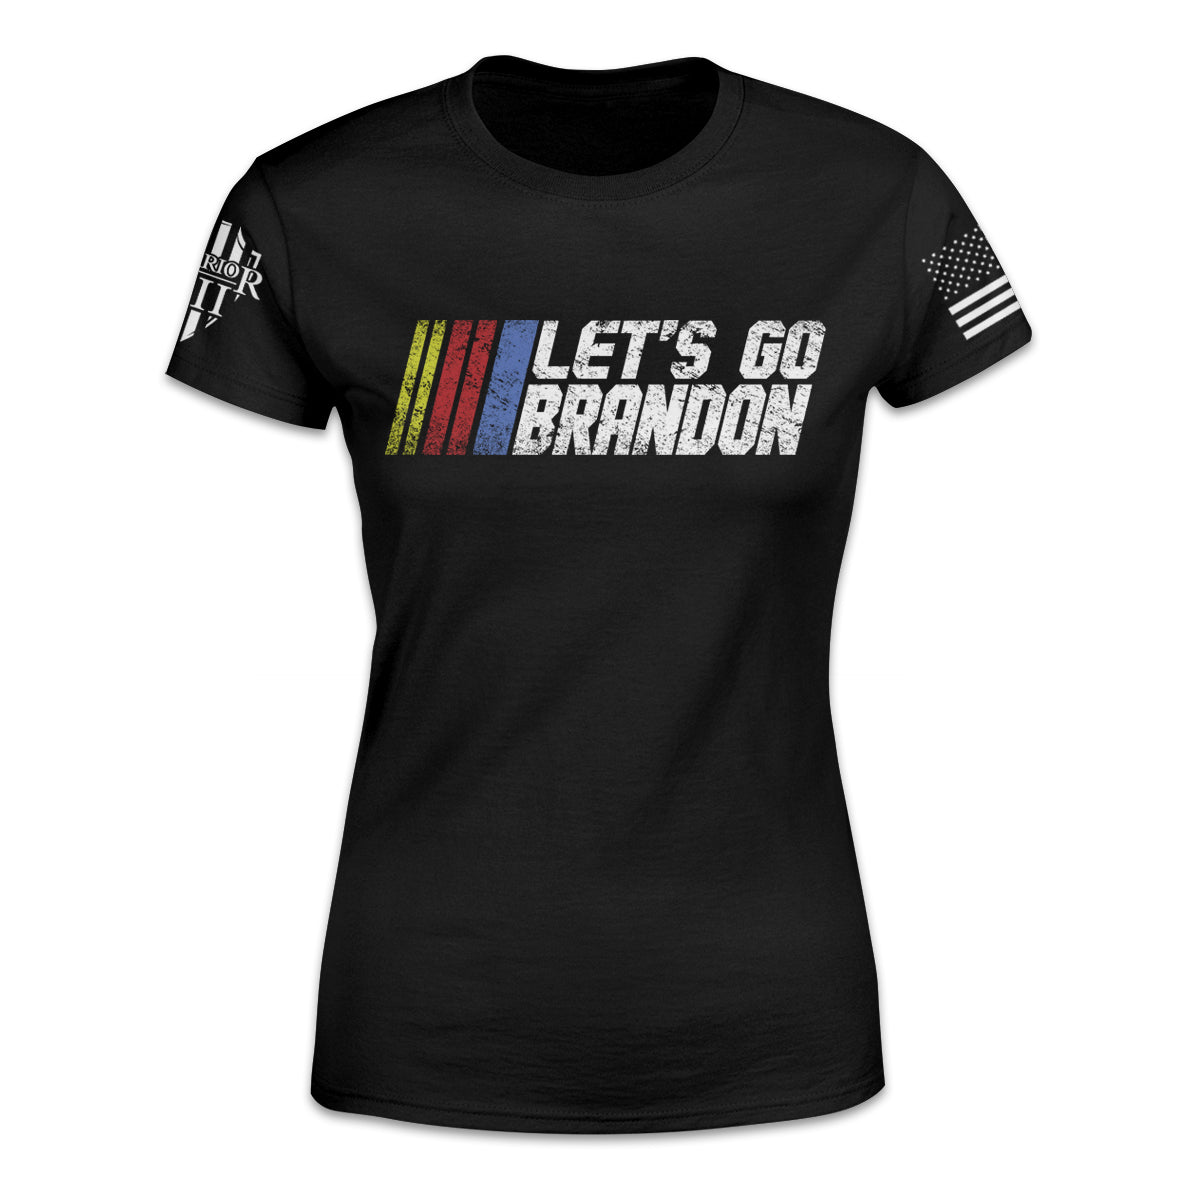 A black t-shirt with the words "Let's Go Brandon" printed on the front of the shirt.